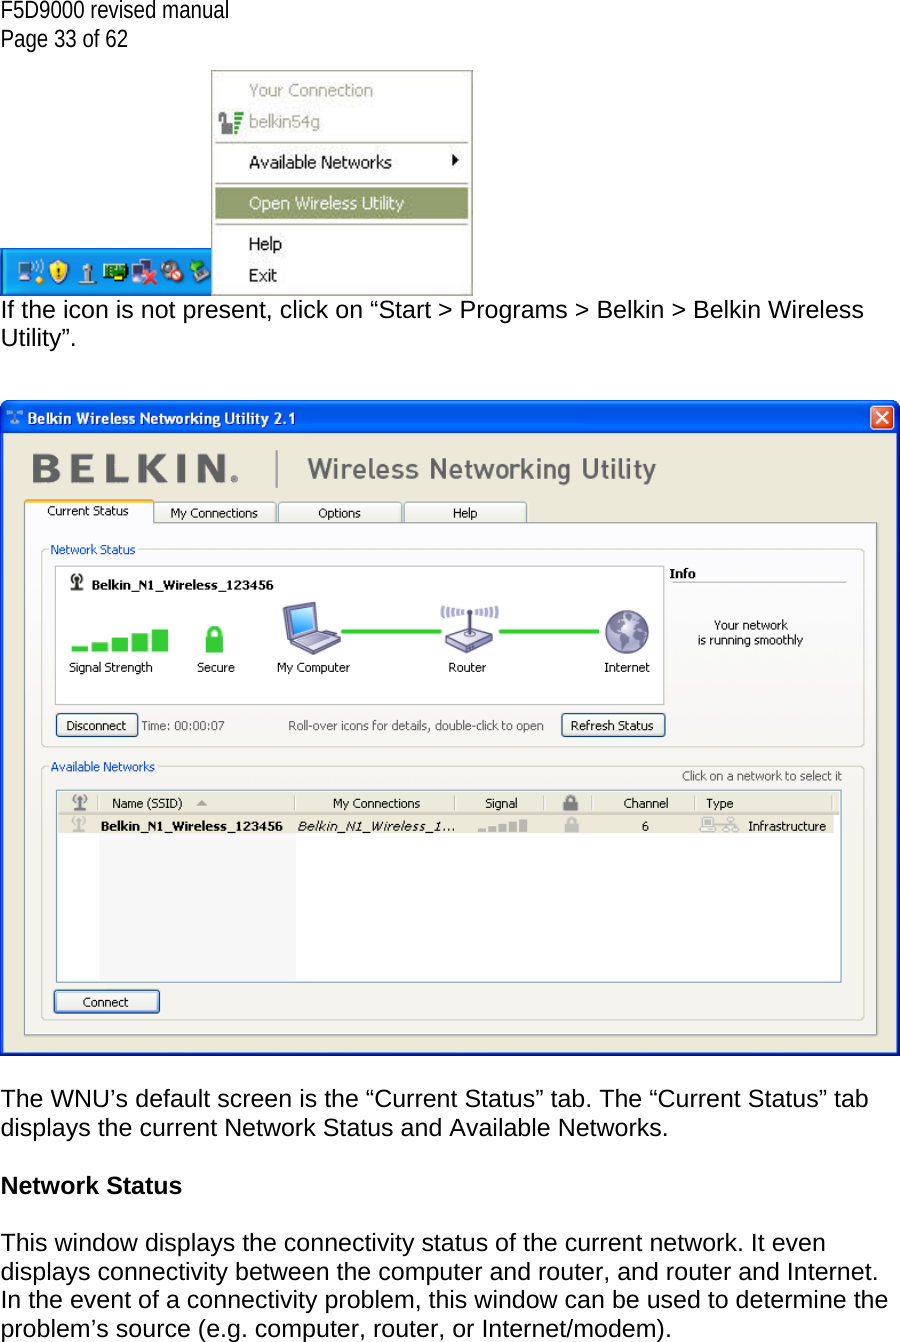 F5D9000 revised manual Page 33 of 62  If the icon is not present, click on “Start &gt; Programs &gt; Belkin &gt; Belkin Wireless Utility”.     The WNU’s default screen is the “Current Status” tab. The “Current Status” tab displays the current Network Status and Available Networks.  Network Status  This window displays the connectivity status of the current network. It even displays connectivity between the computer and router, and router and Internet. In the event of a connectivity problem, this window can be used to determine the problem’s source (e.g. computer, router, or Internet/modem).  